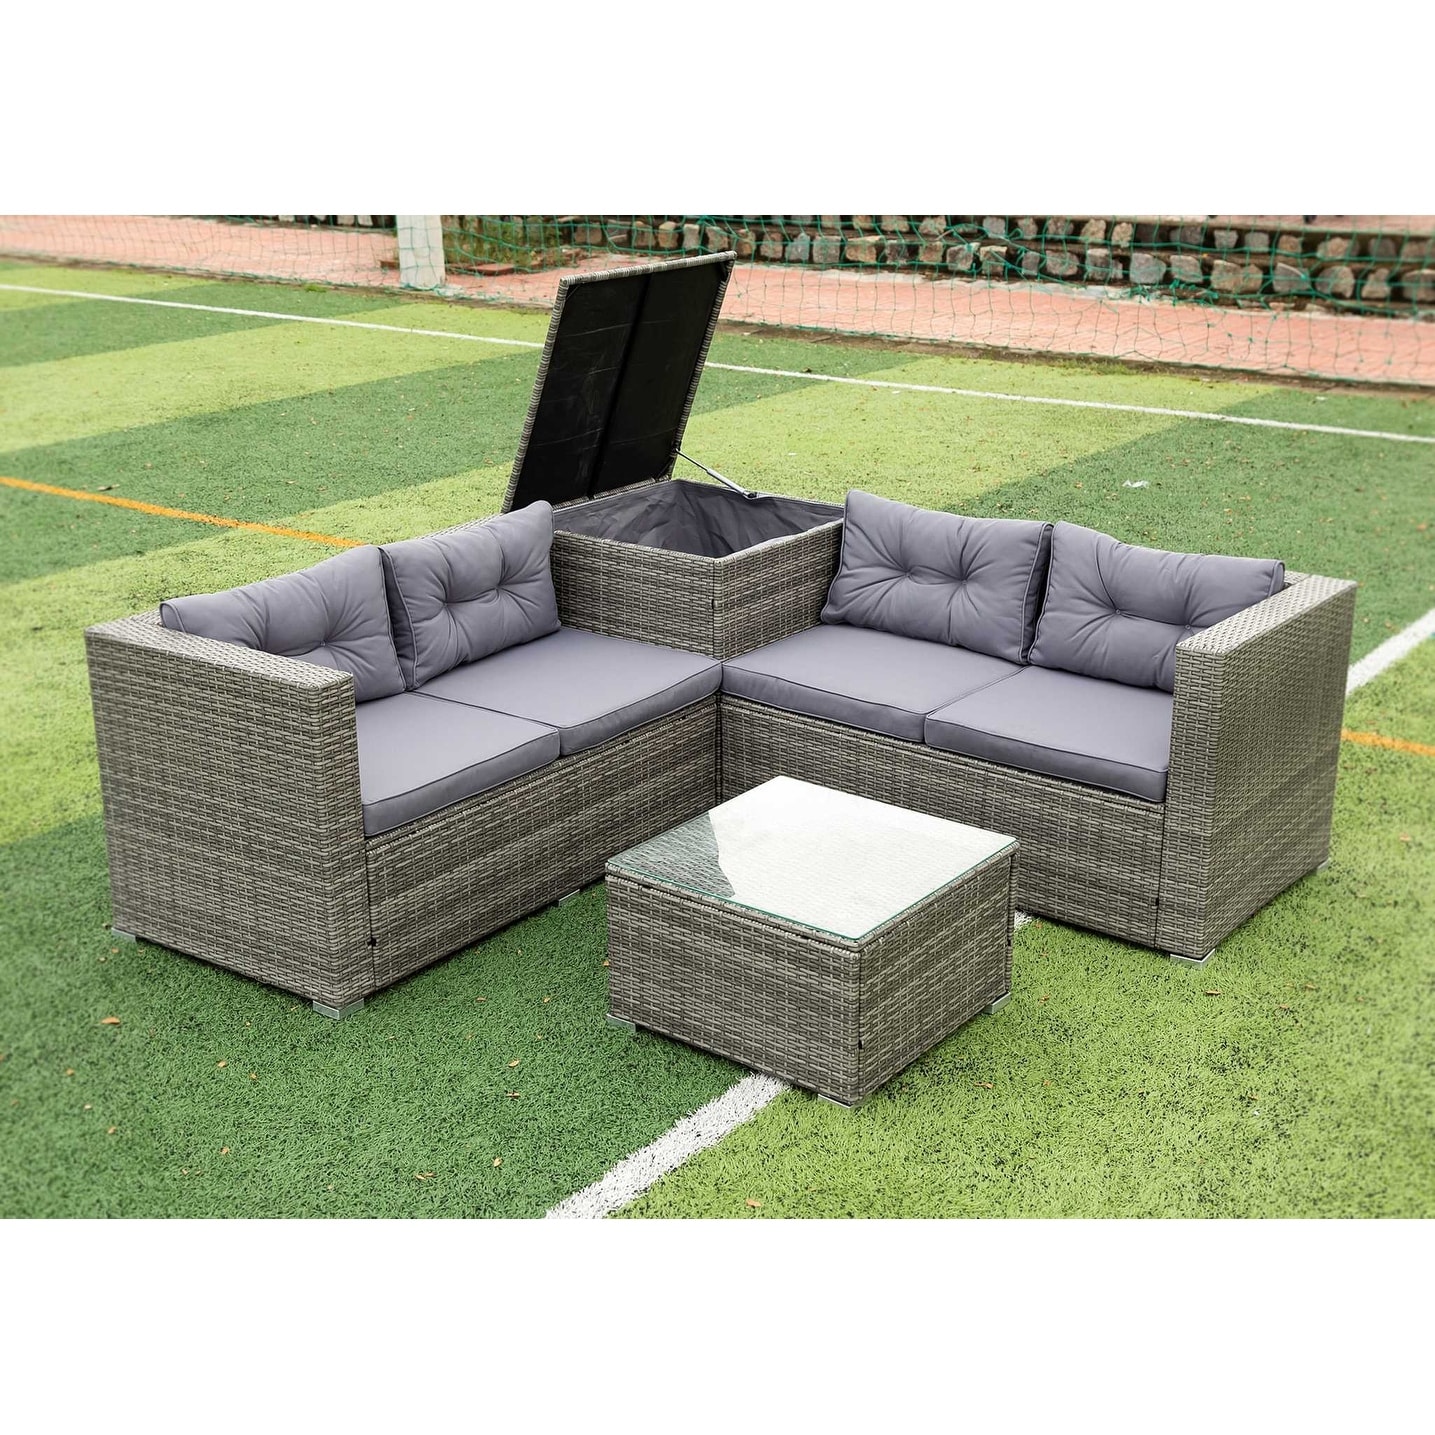 4 Piece Patio Sectional Wicker Rattan Outdoor Furniture Sofa Set With Storage Box